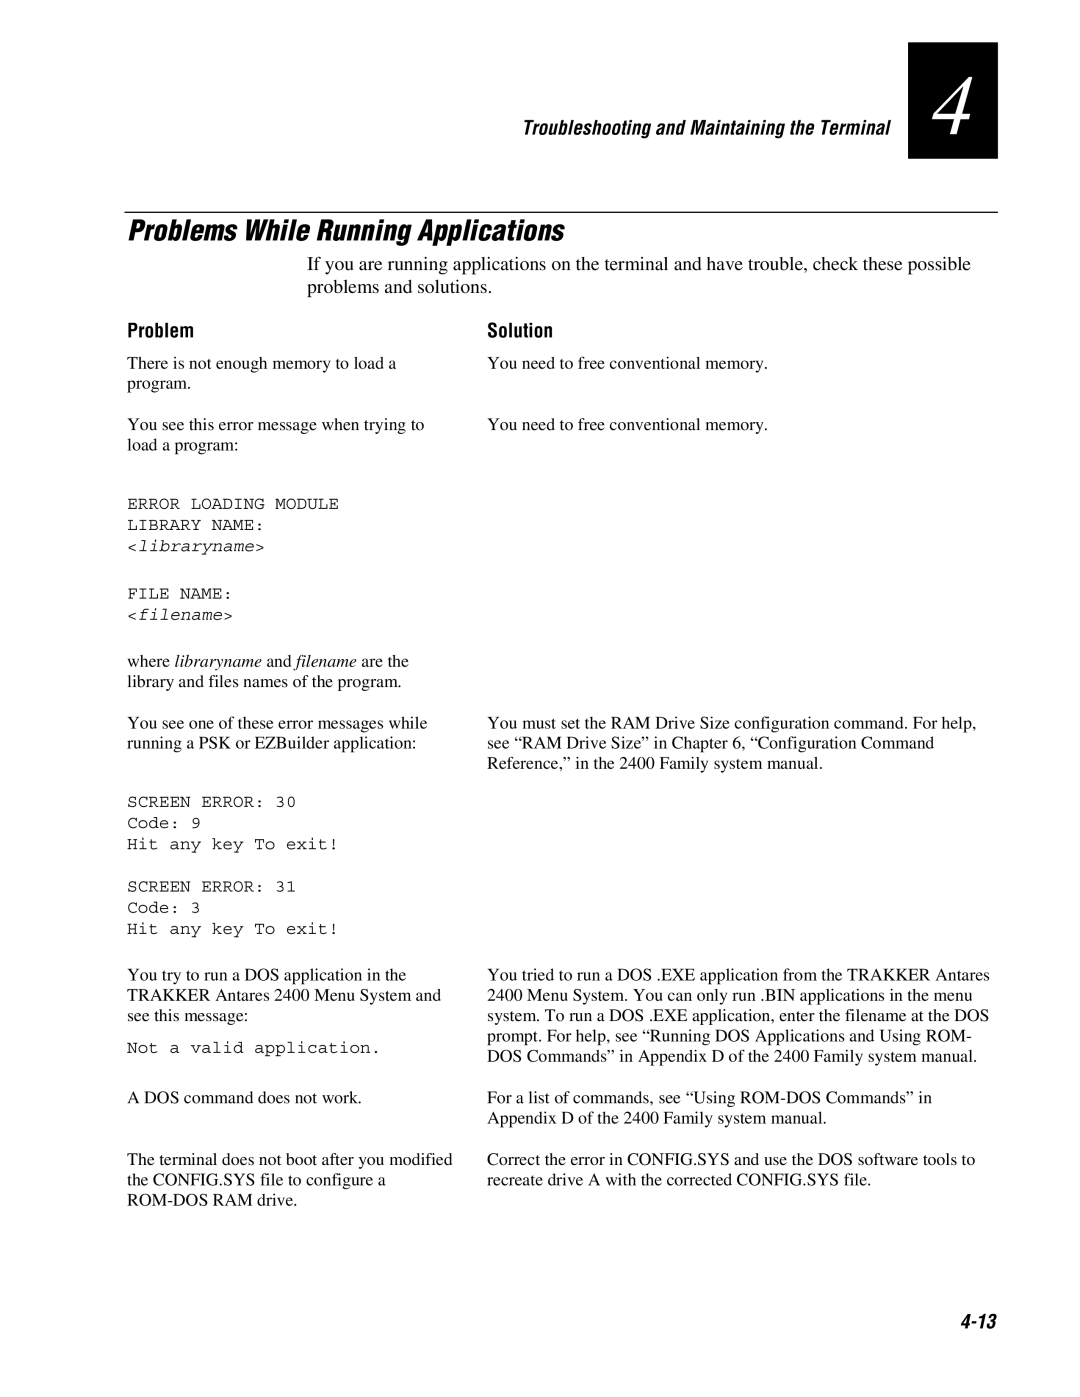 IBM 243X user manual Problems While Running Applications, 4-13, Solution, Troubleshooting and Maintaining the Terminal 